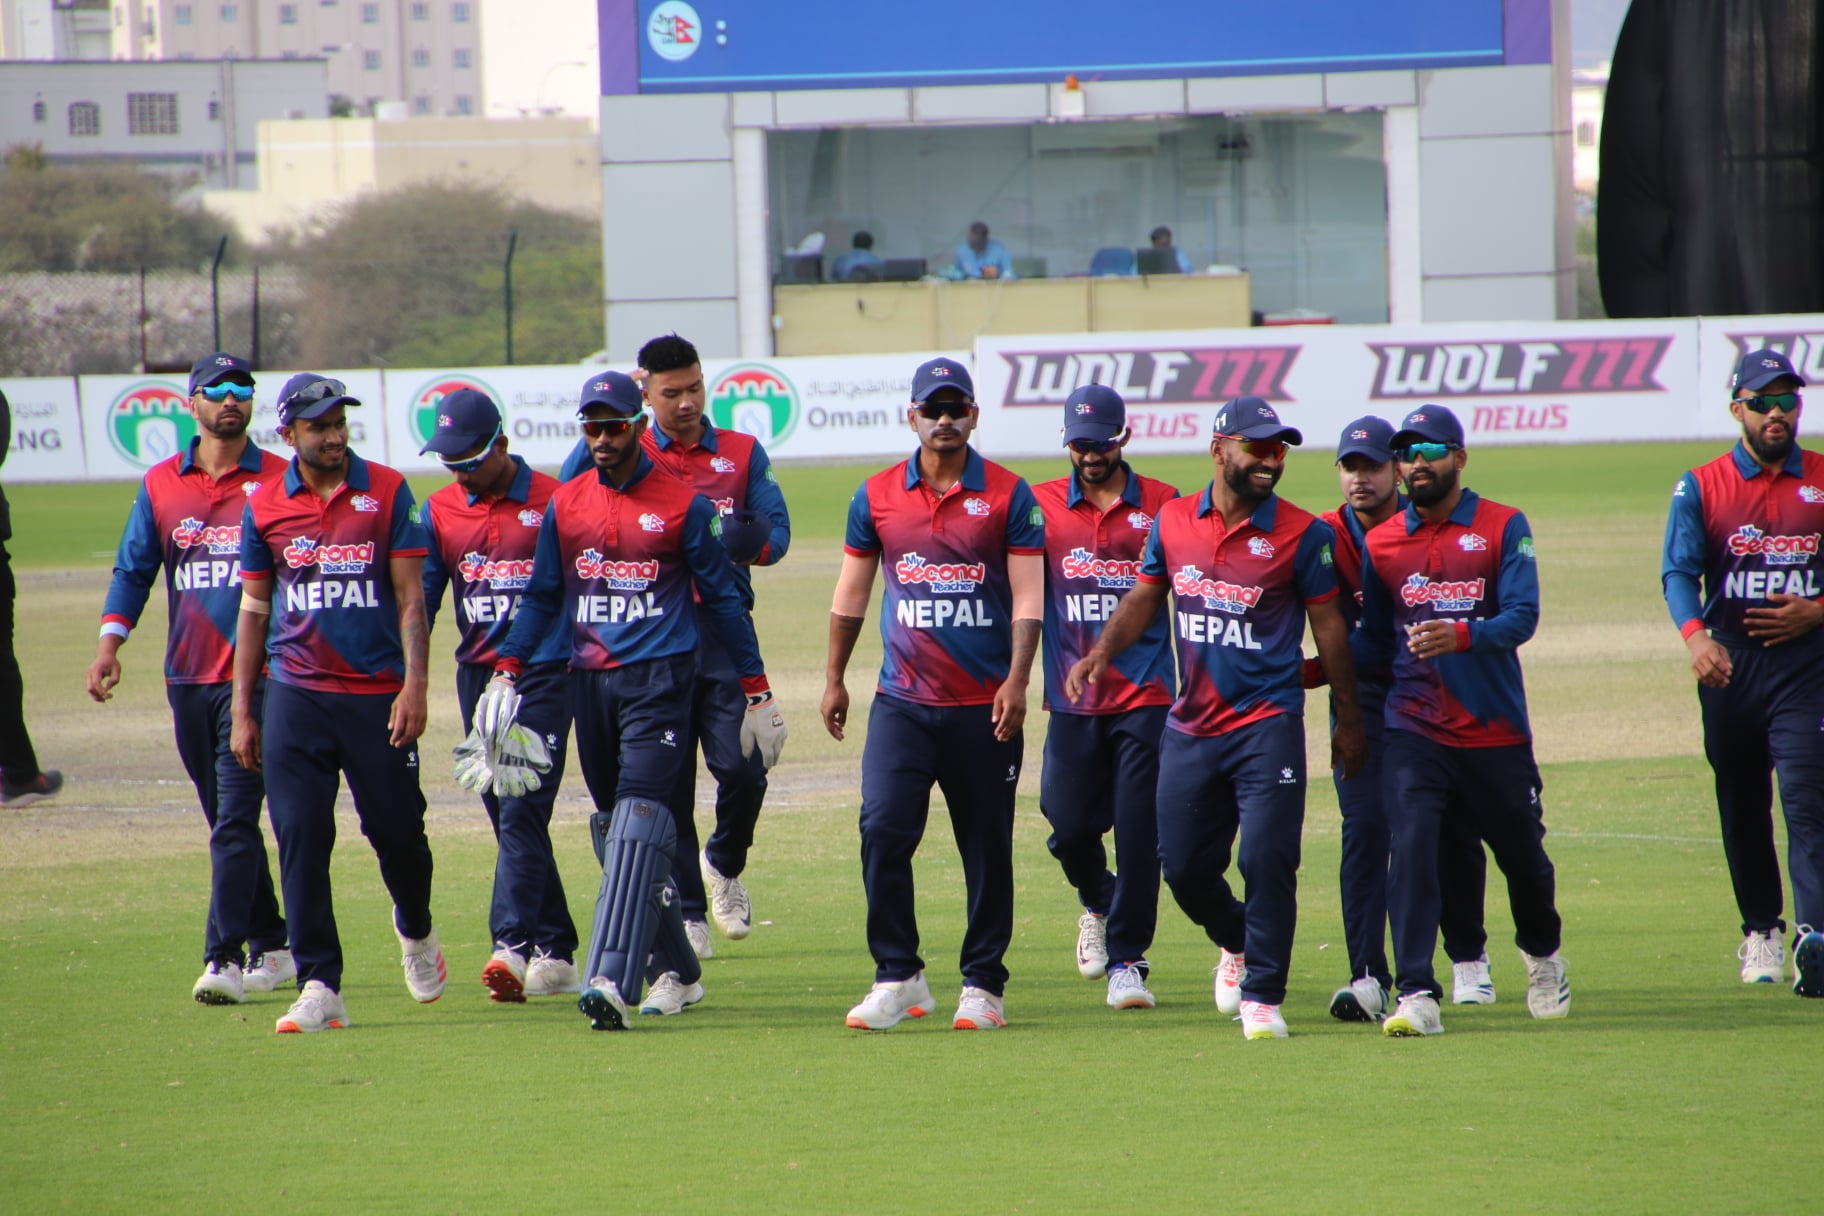 Nepal lose to UAE by 99 runs in World Cup League 2